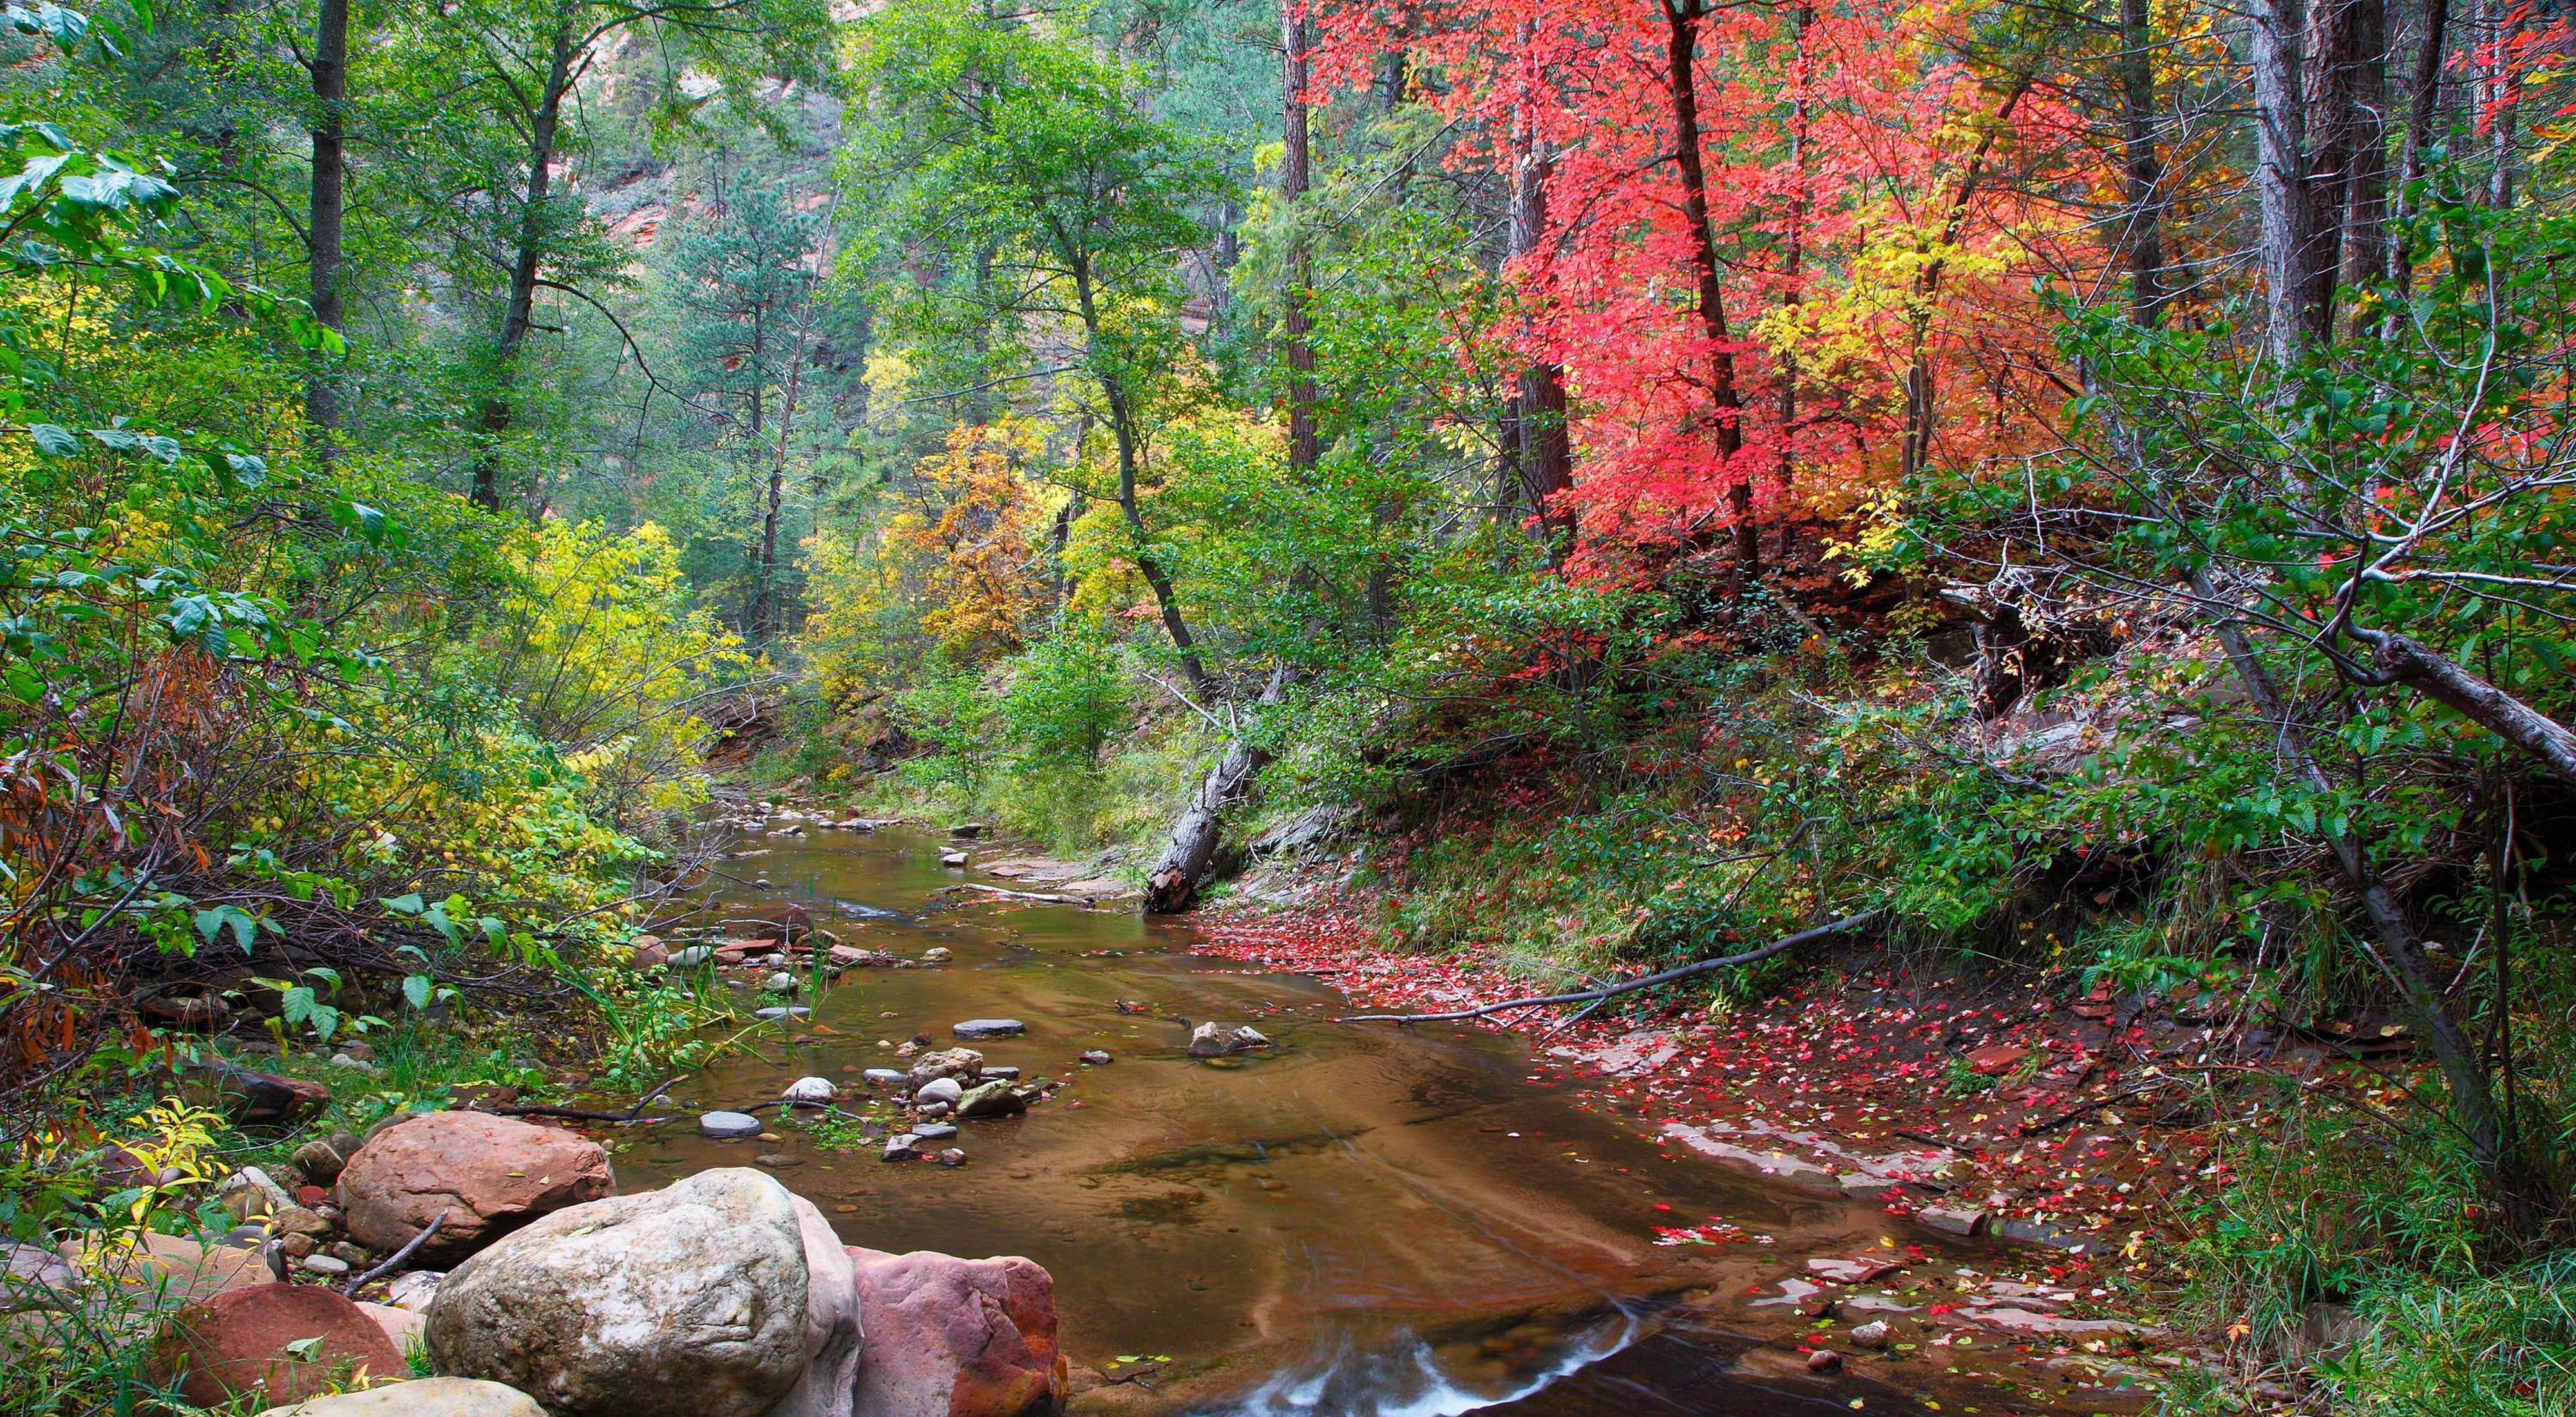 A creek flowing through a brightly colored forest.